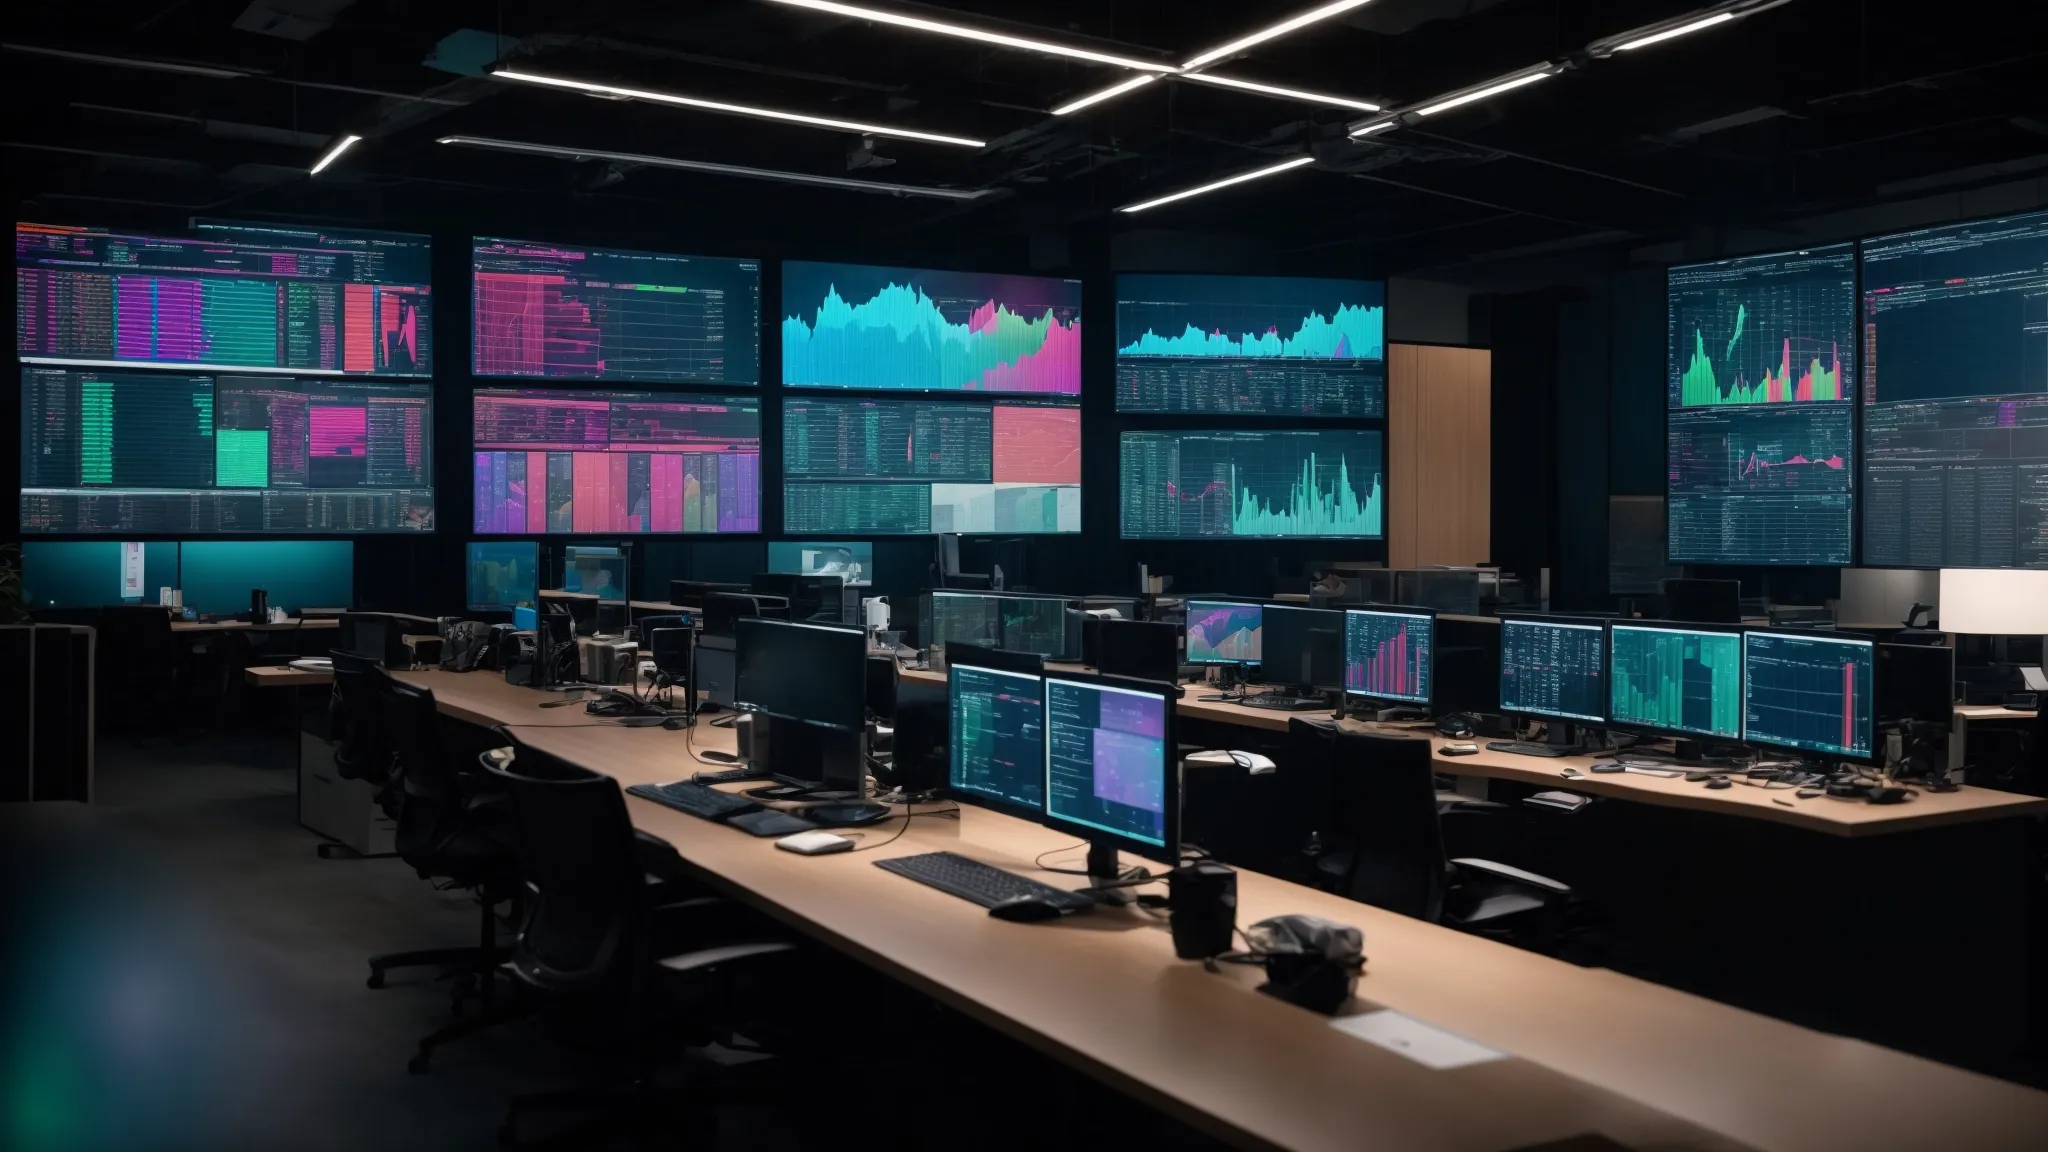 a high-tech office with multiple large screens displaying colorful data analytics graphs and an ai brain hologram.